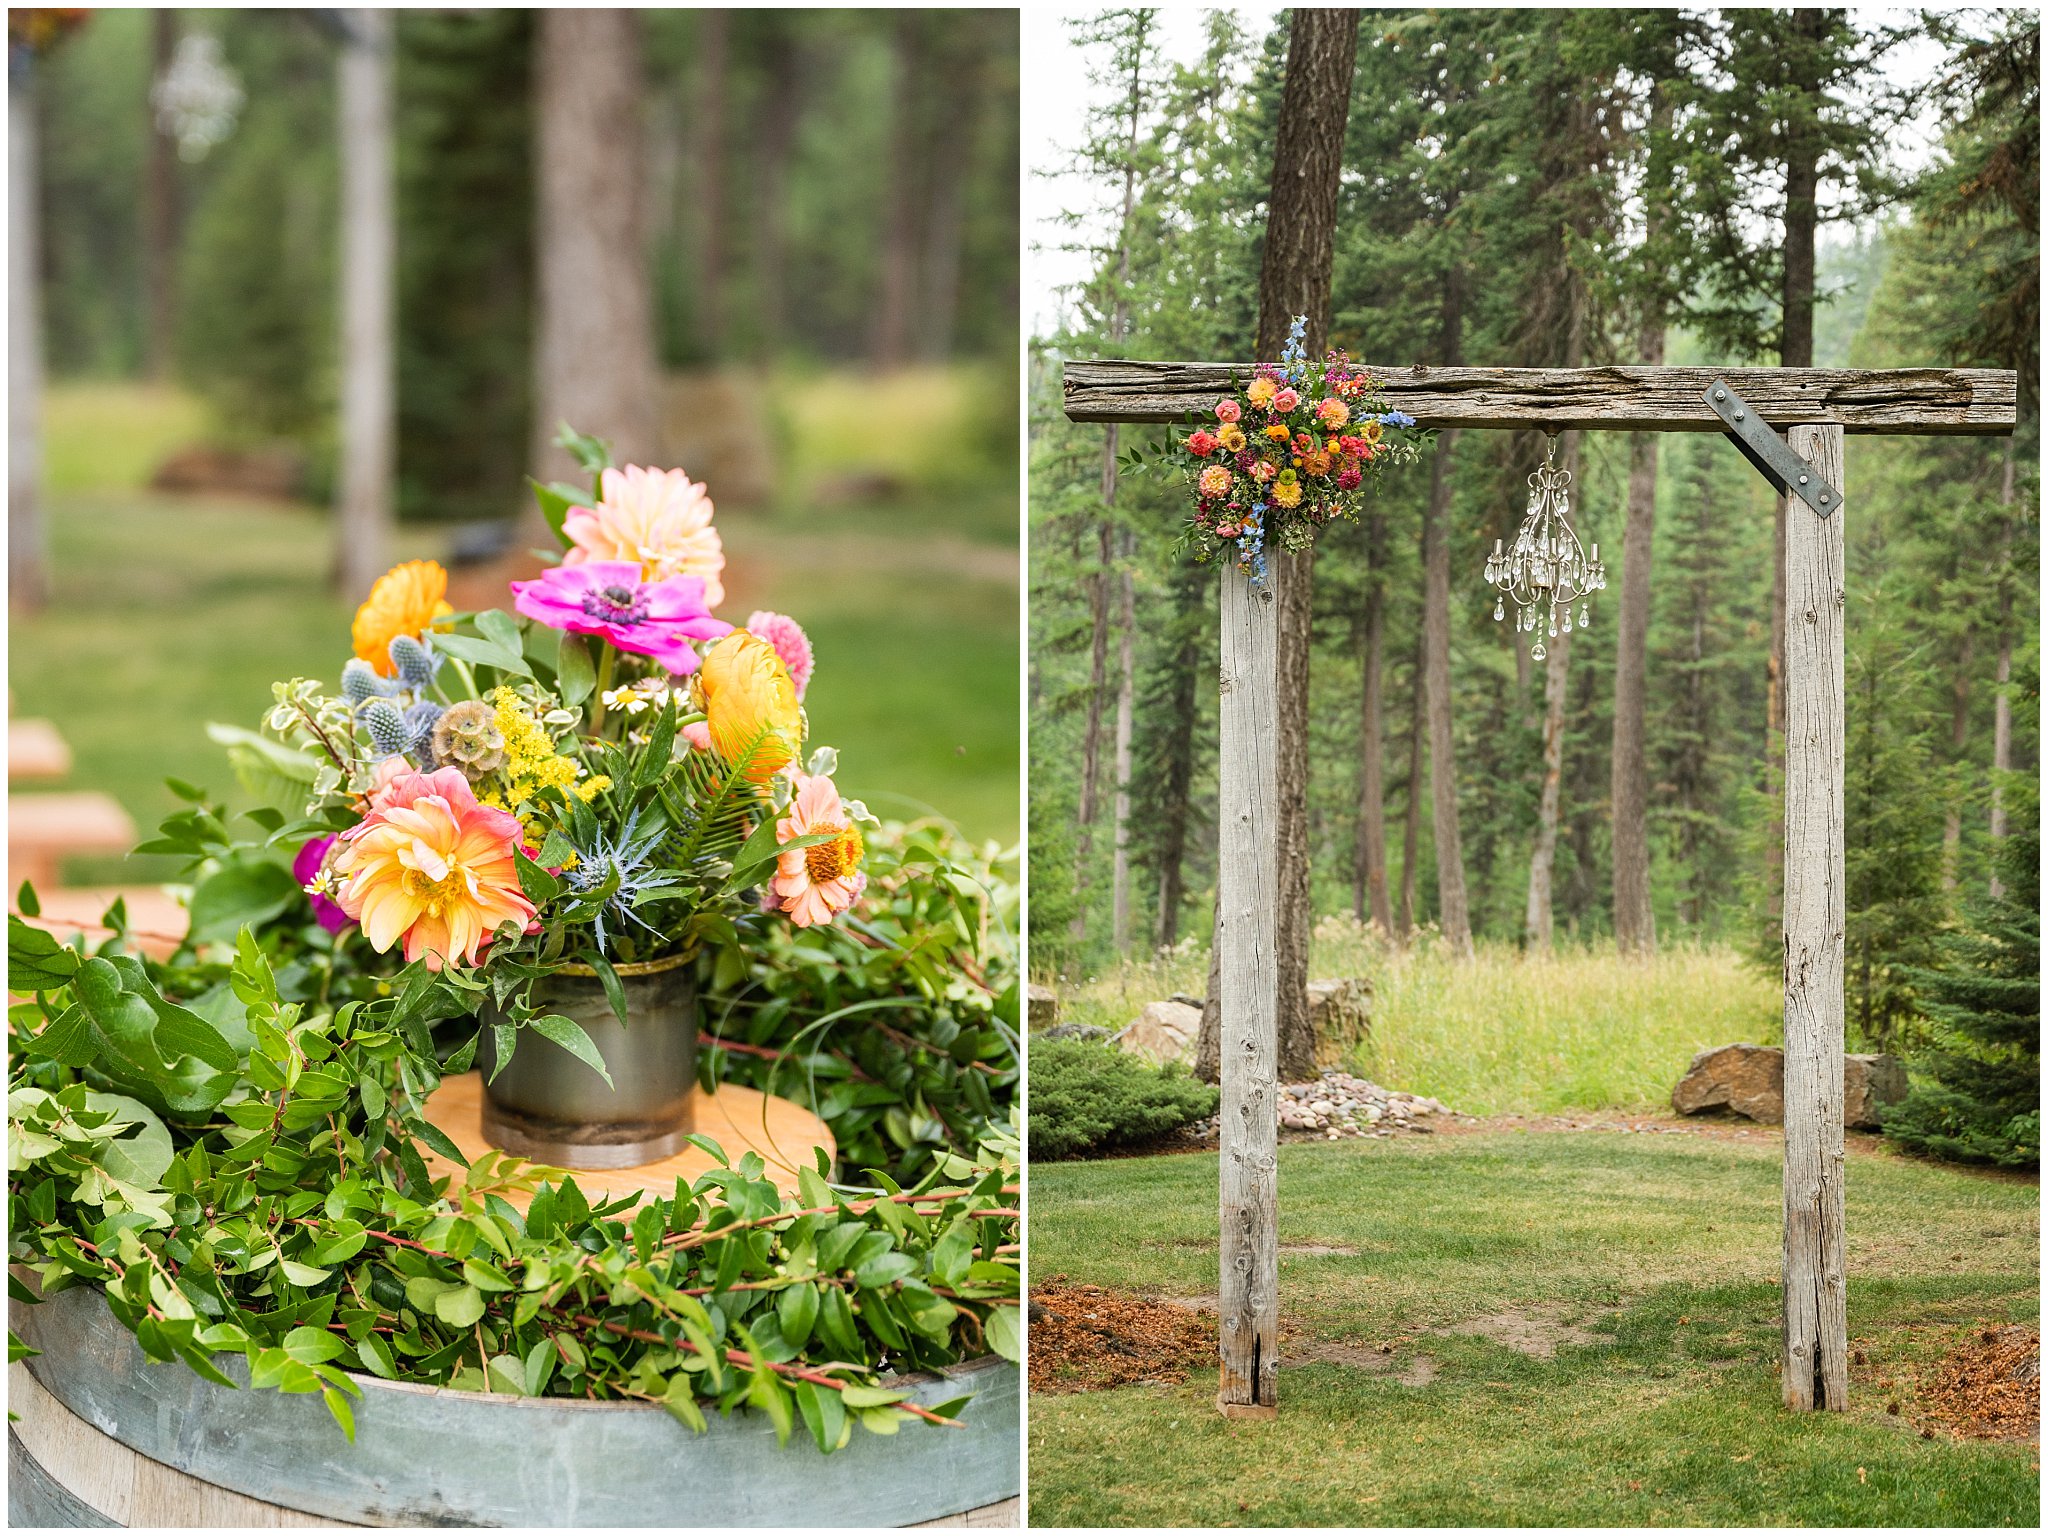 Ceremony site and arch details with wildflowers and rustic arch in the Montana forest | Mountainside Weddings Kalispell Montana Destination Wedding | Jessie and Dallin Photography